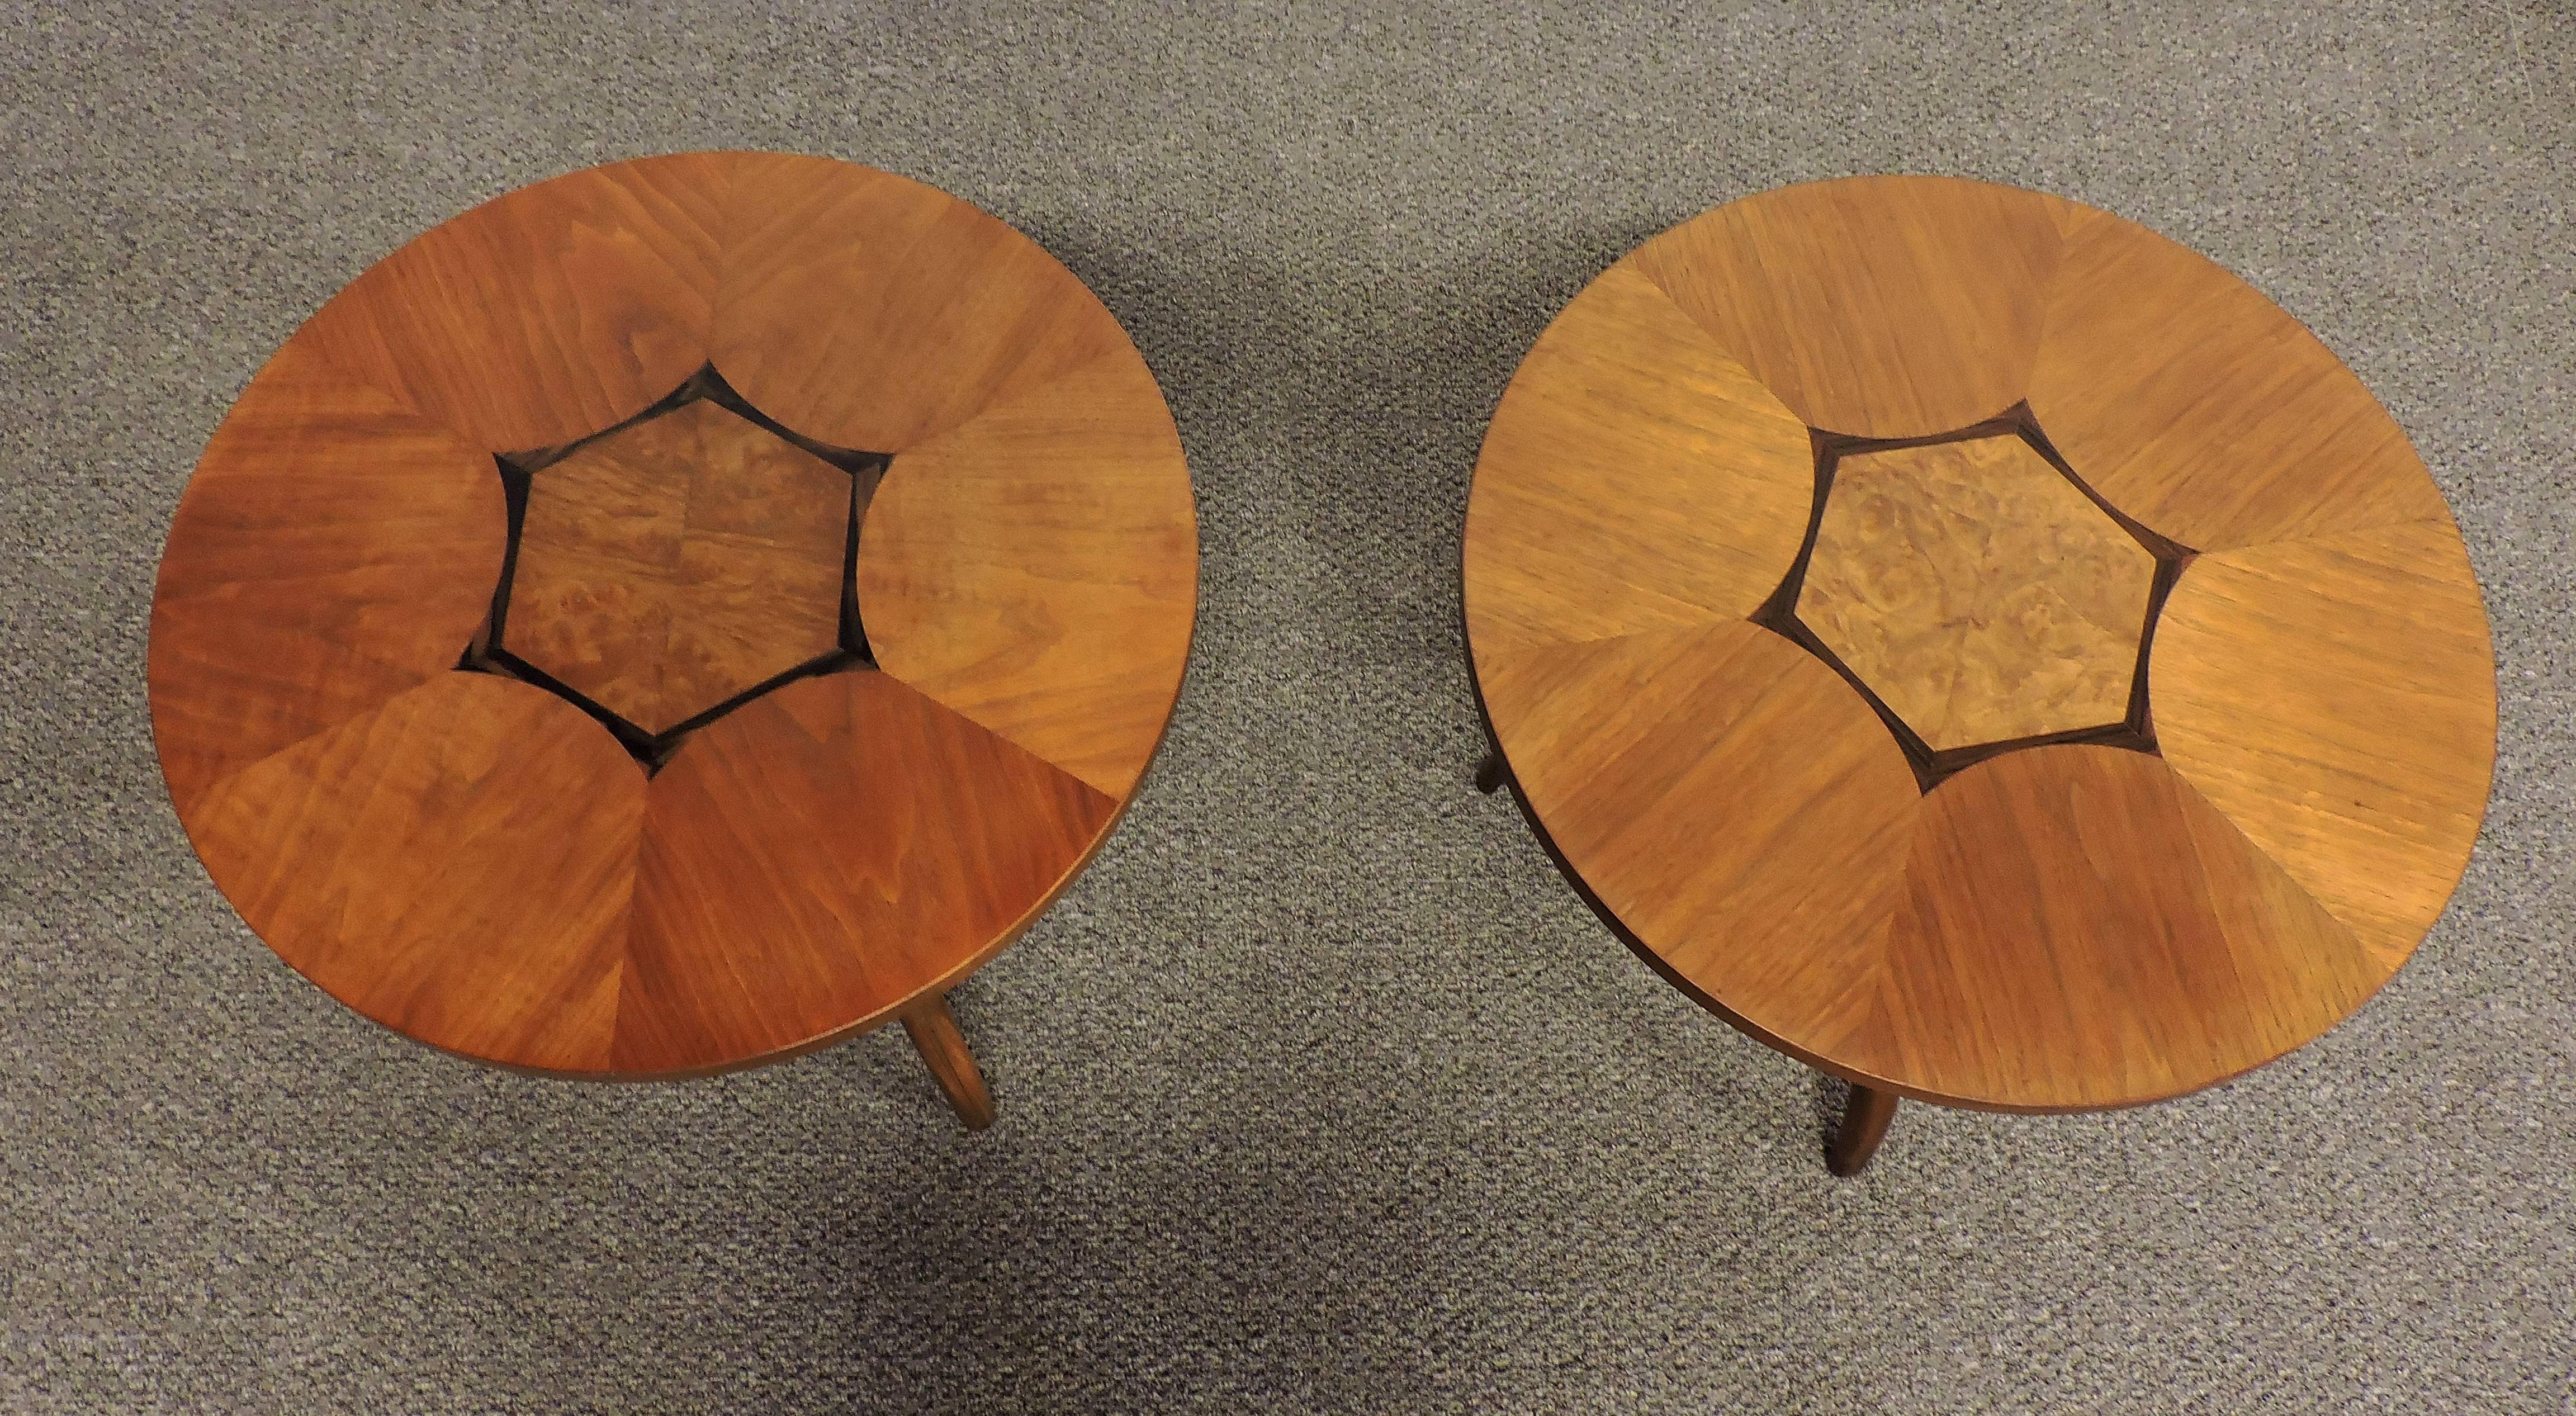 Beautiful pair of round walnut end tables made by high quality furniture manufacturer, Drexel. These tables have graceful curved tripod legs and a round inlaid wood top with a striking geometric design. Marked composite by Drexel on bottom.